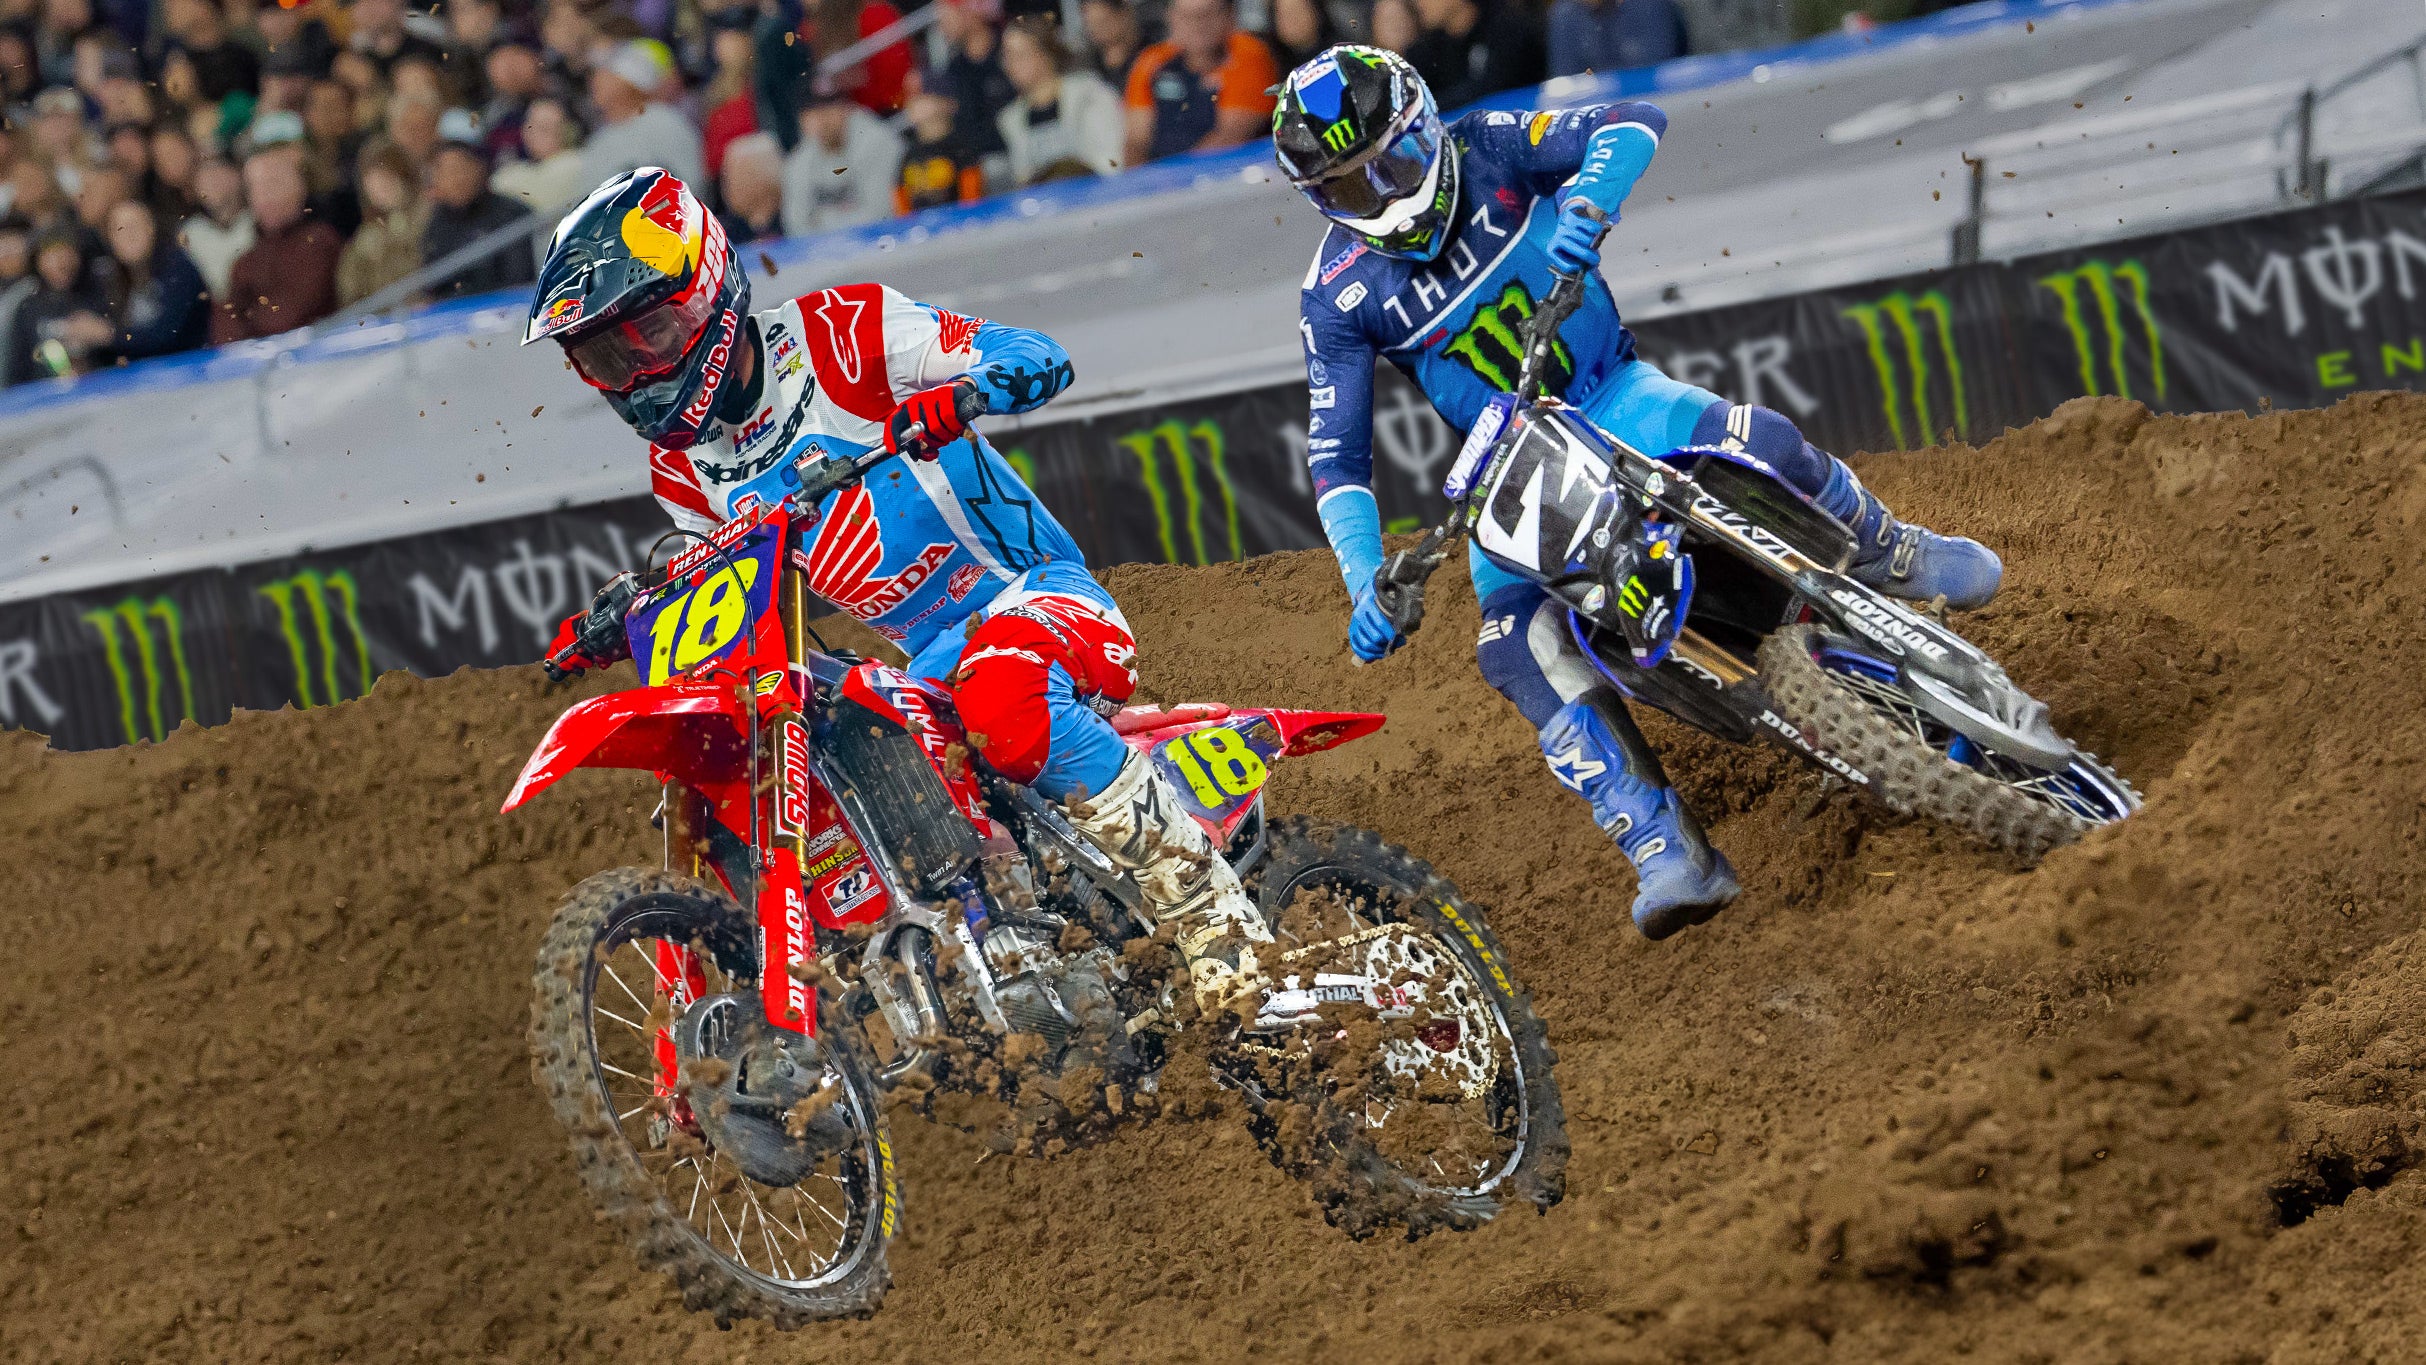 SuperMotocross World Championship Finals presale password for show tickets in Fort Worth, TX (Texas Motor Speedway)